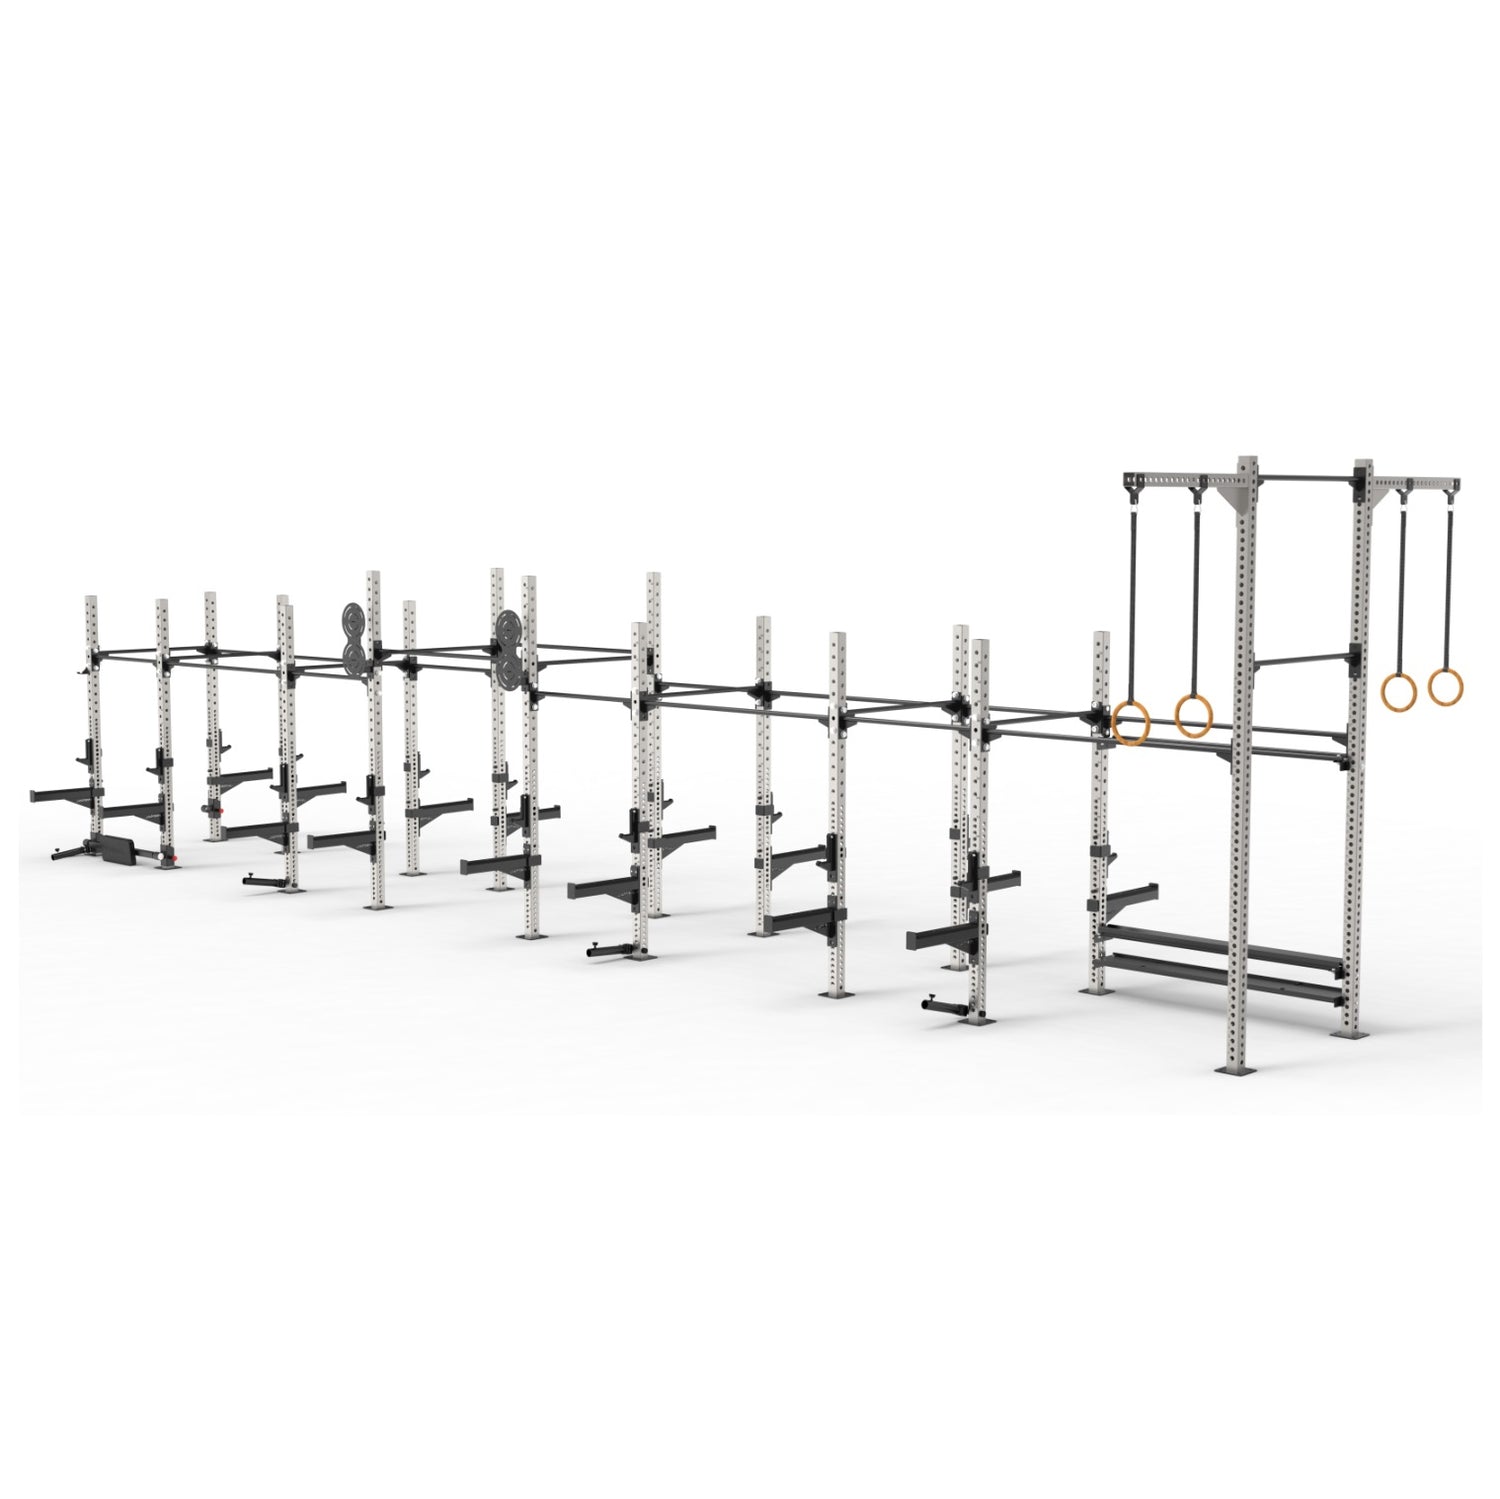 Primal Performance Series PXD Training Rig - 10 Station